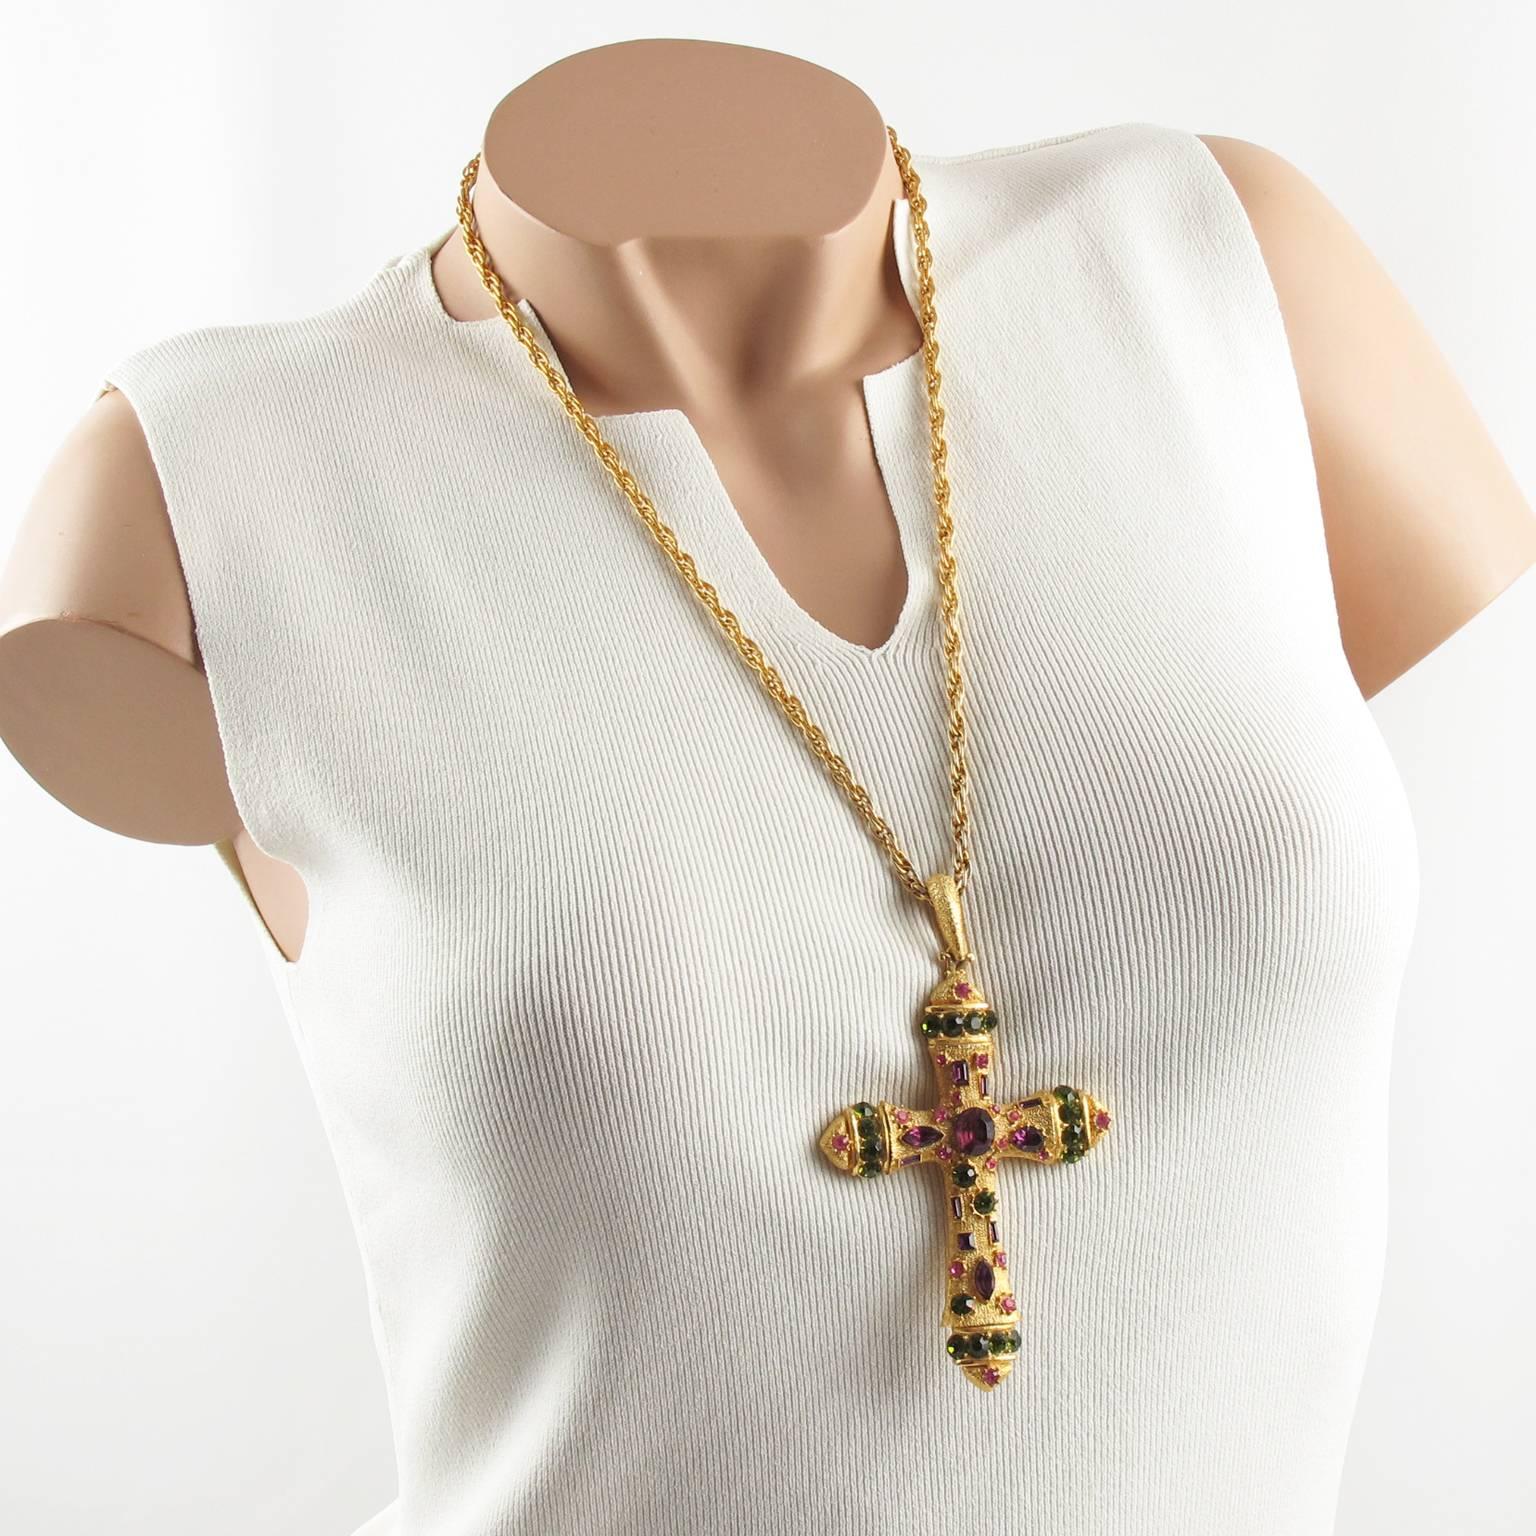 Massive gilt metal cross pendant necklace. Featuring a huge dimensional modernist cross pendant, all ornate with glass cut rhinestones in purple grape, olive green and blush pink color. Original long and heavy twisted gilt metal chain with spring